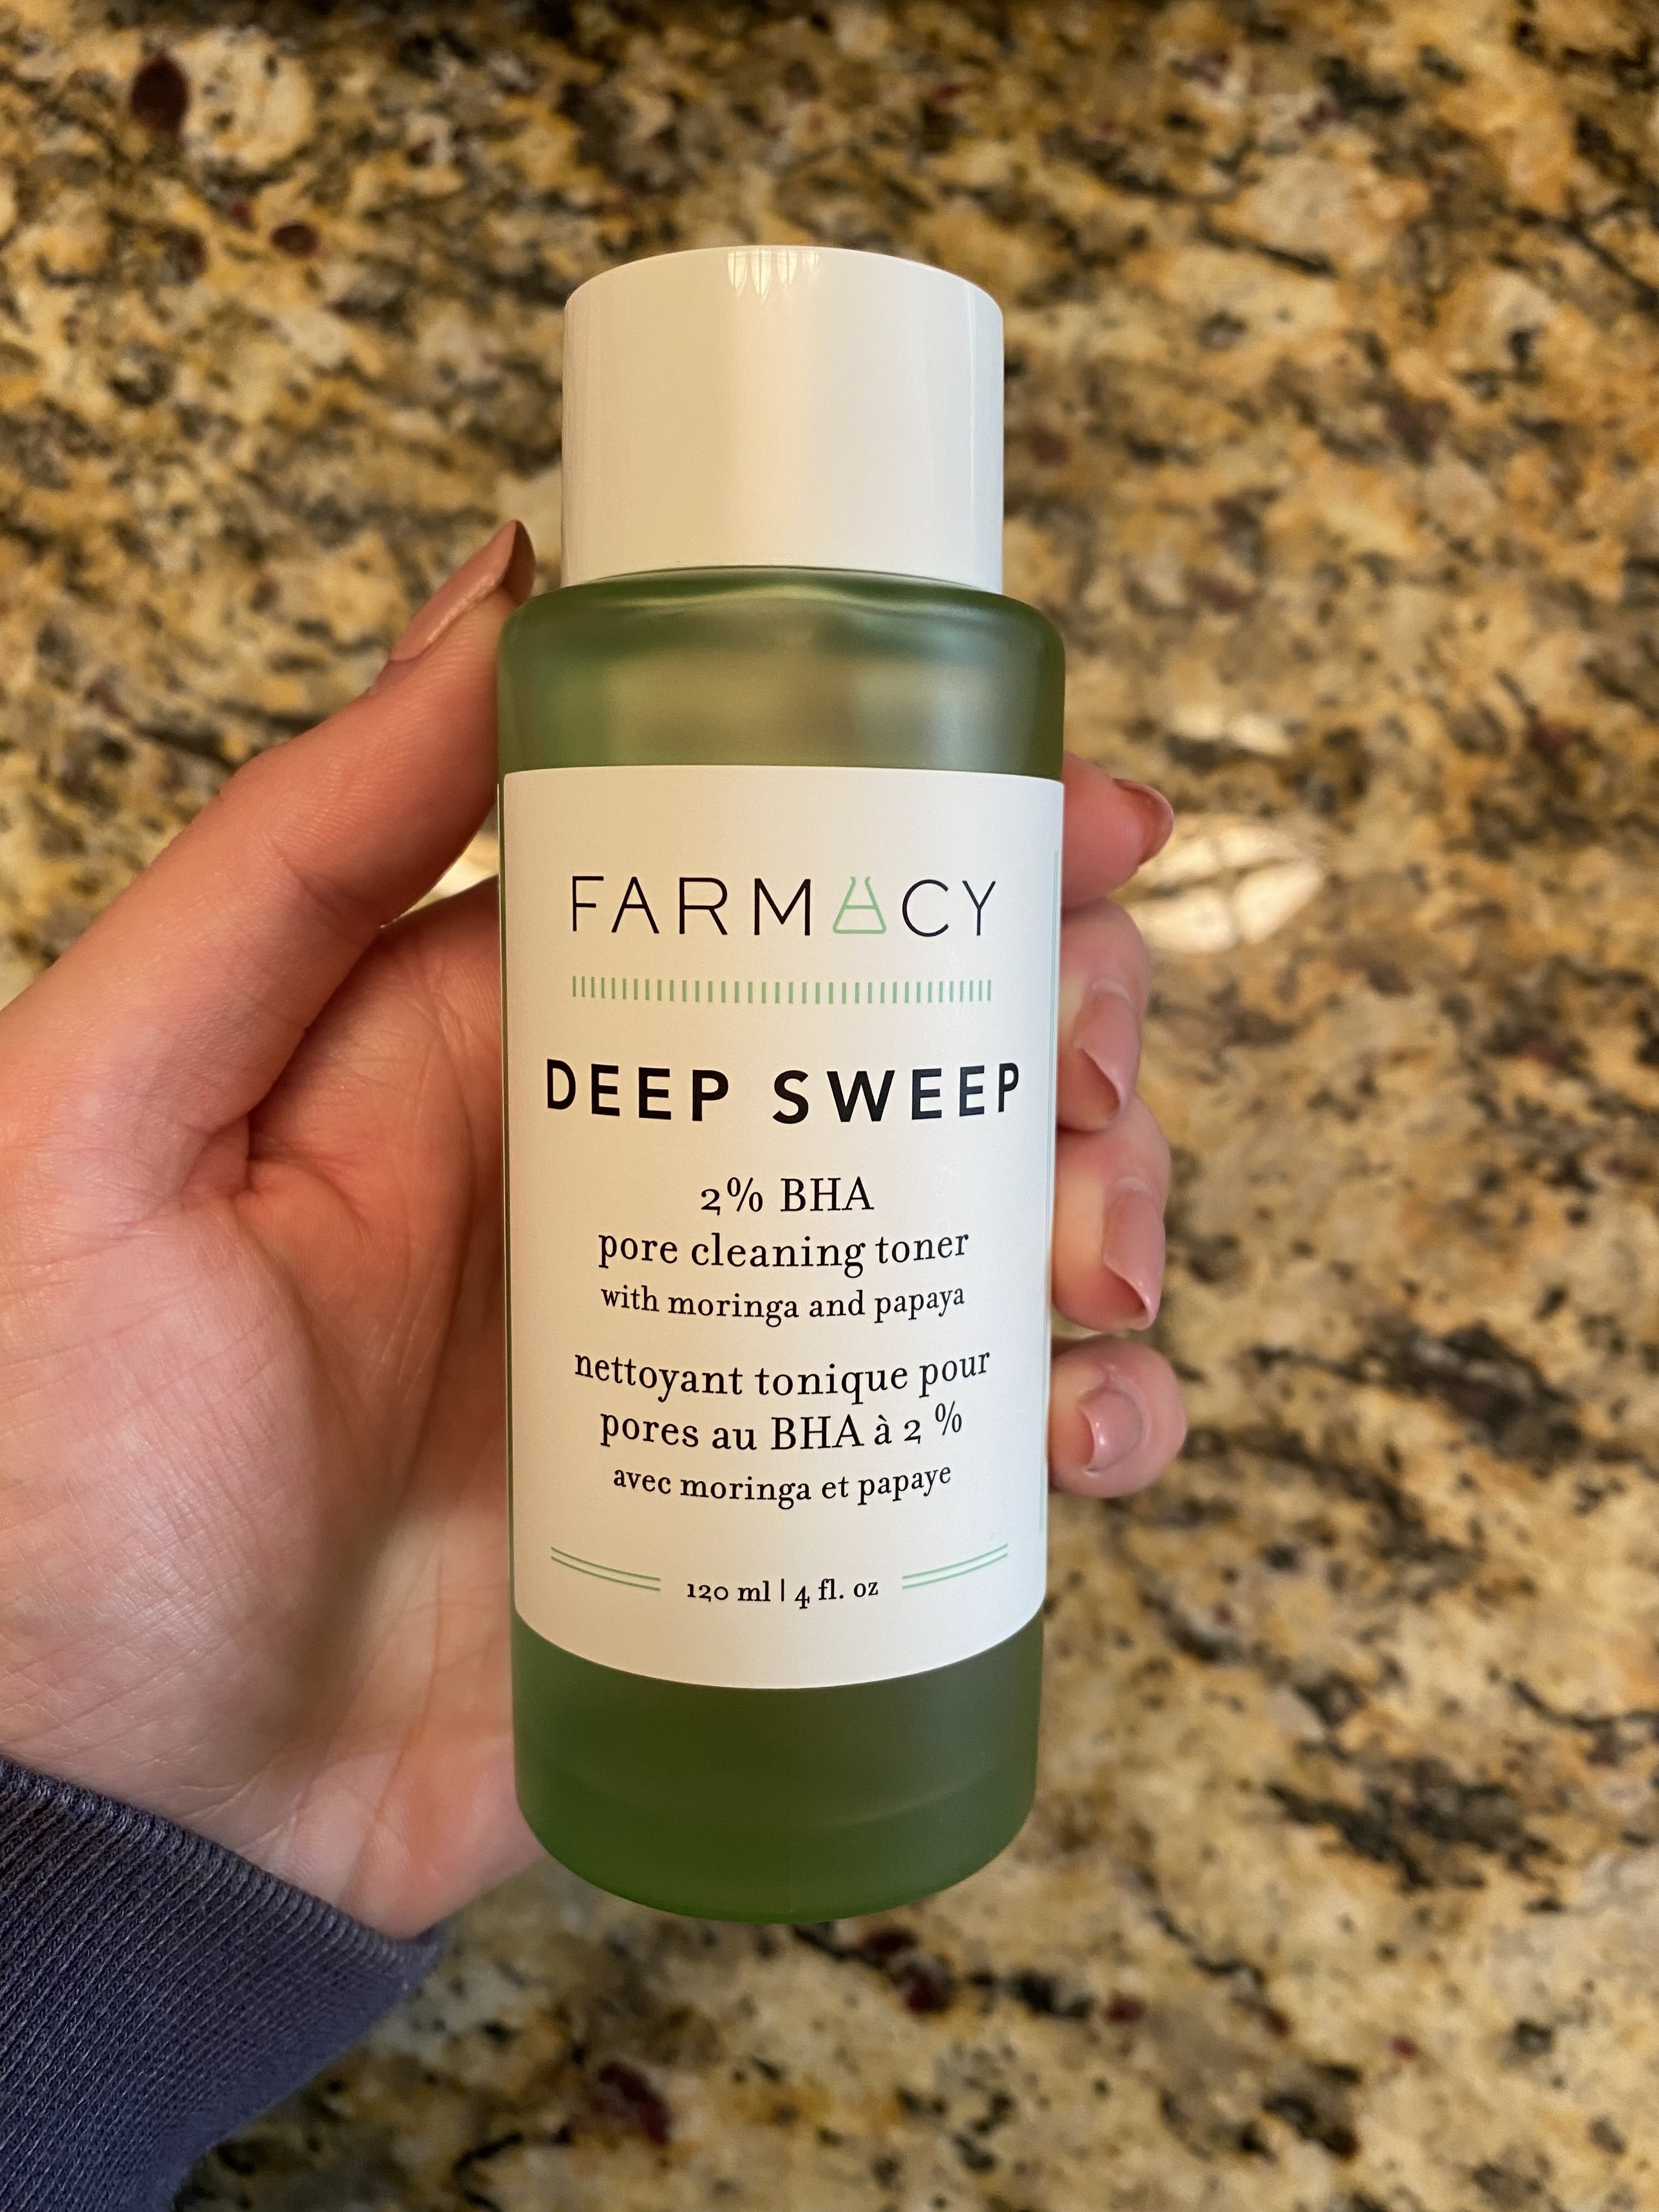 A product picture of the Farmacy DEEP SWEEP pore cleaning 2% BHA toner